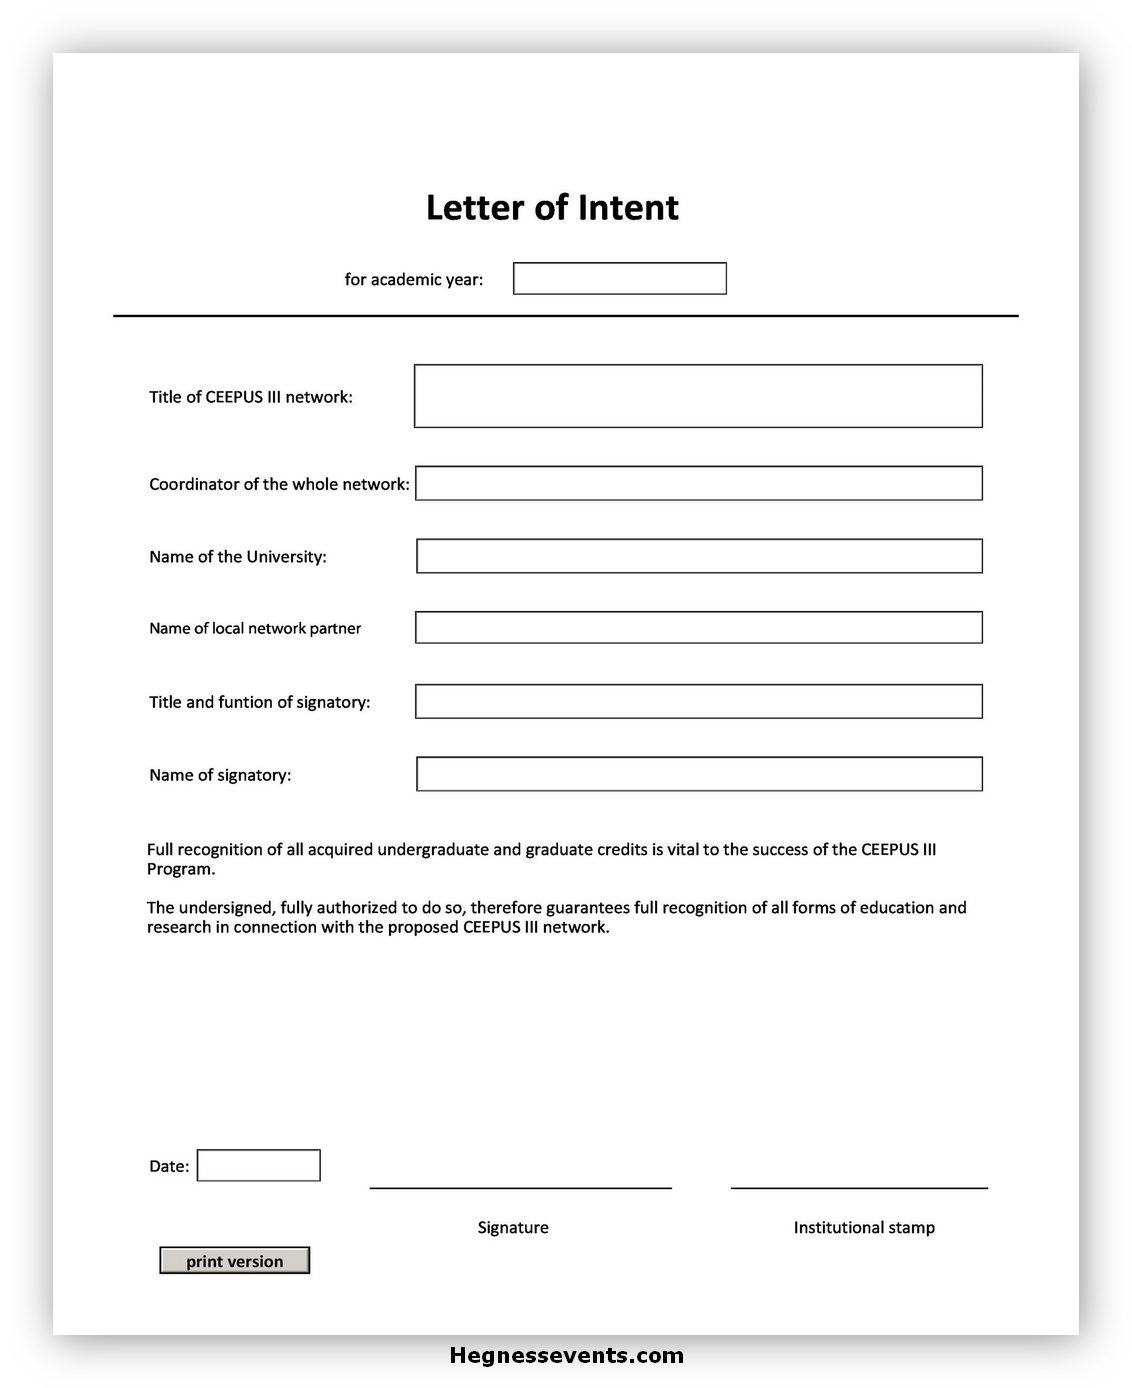 Letter of Intent Template 05